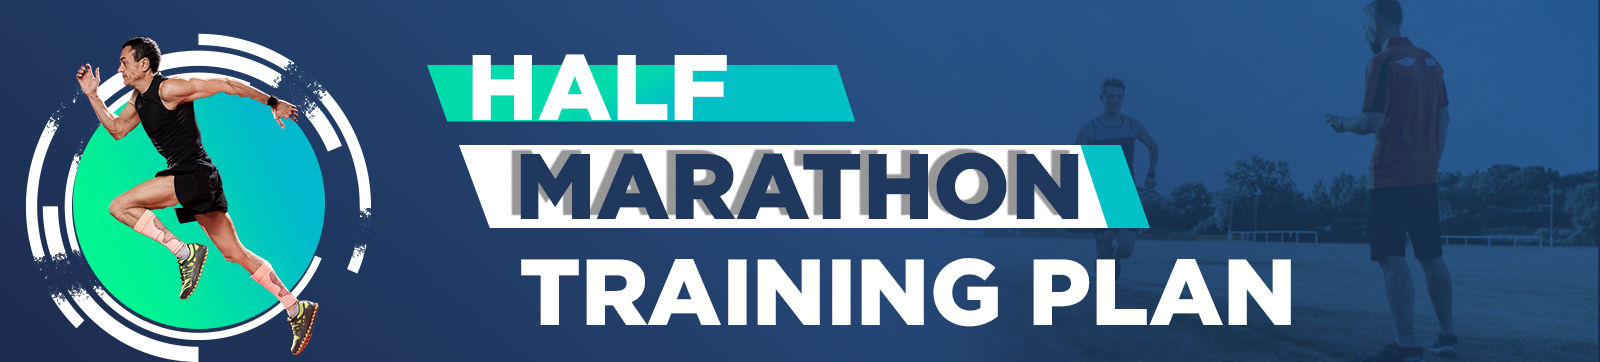 Half Marathon Training Plan for Beginners, What You Need to Know?